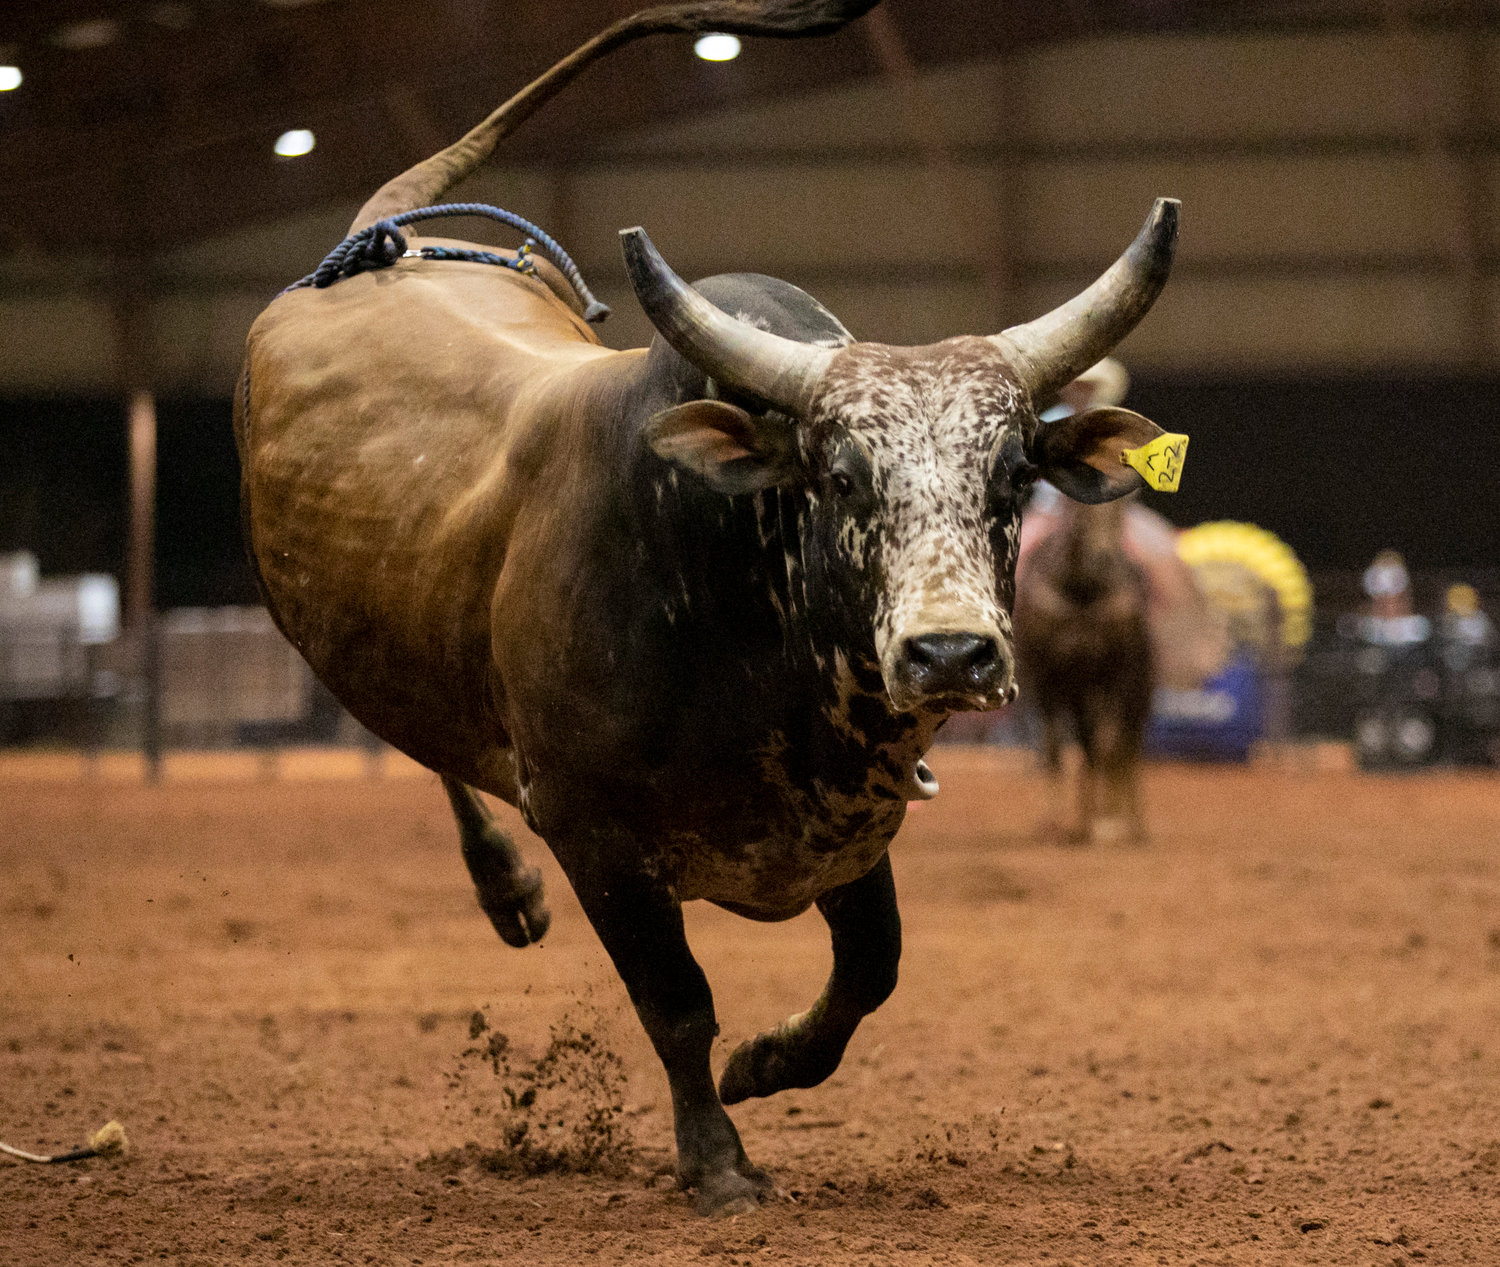 A loose bull looks for its next victim after bucking off its rider at the final event of Saturday night’s Professional Cowboy Association rodeo at the Baldwin County Coliseum presented by the Robertsdale Rotary Club.